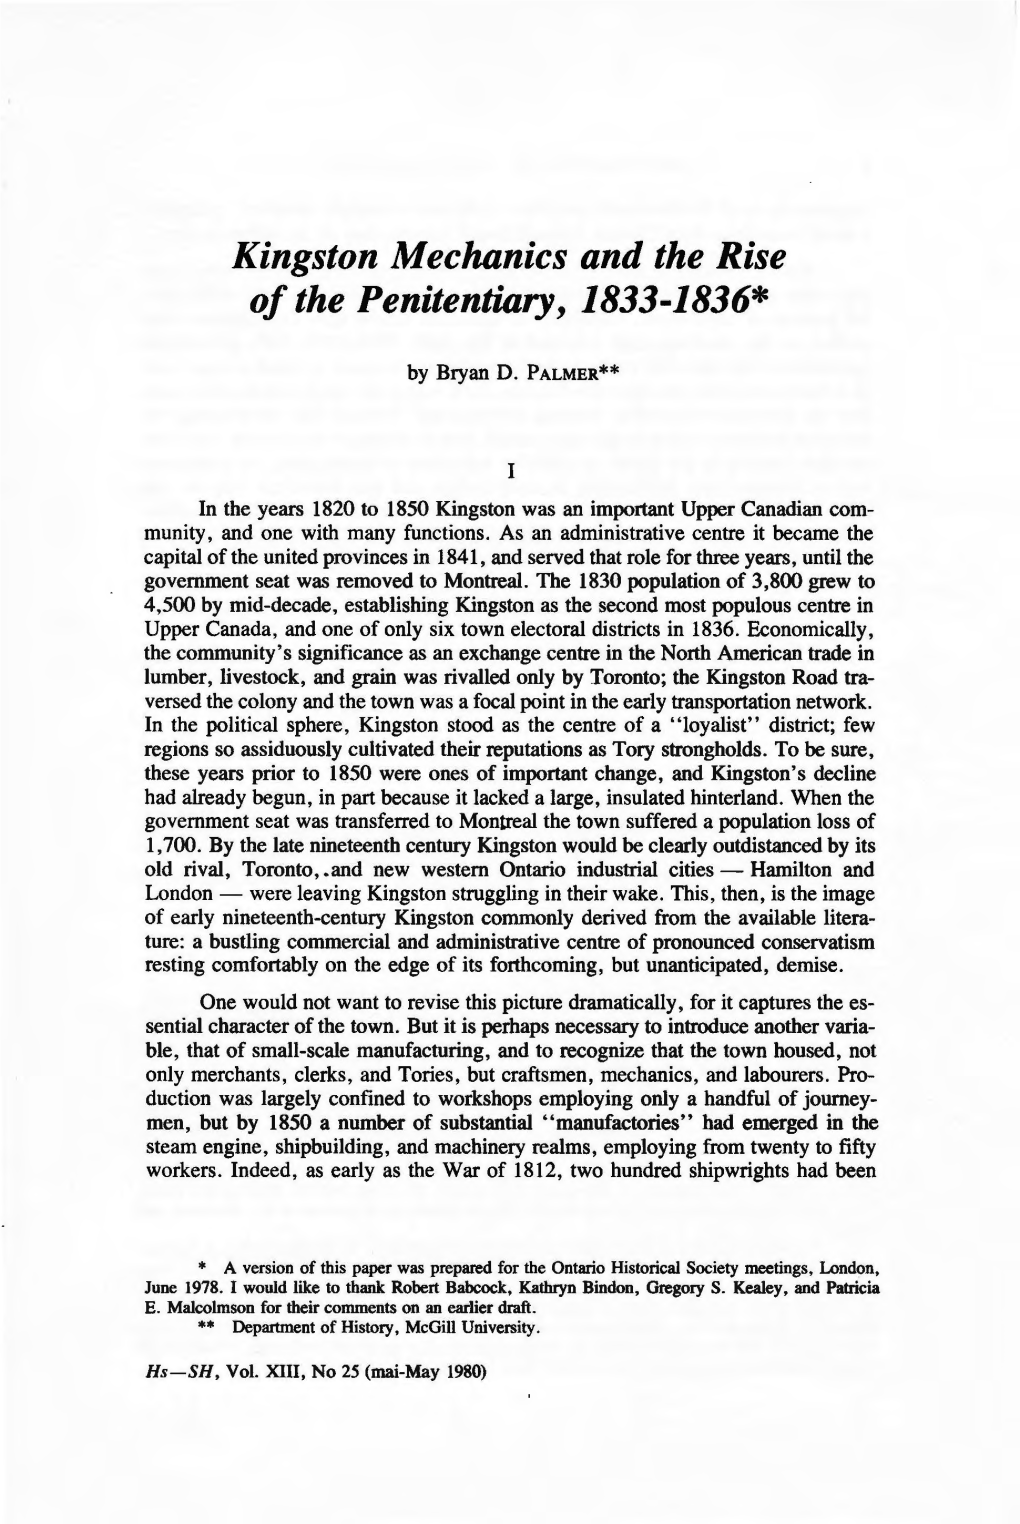 Kingston Mechanics and the Rise of the Penitentiary, 1833-1836*